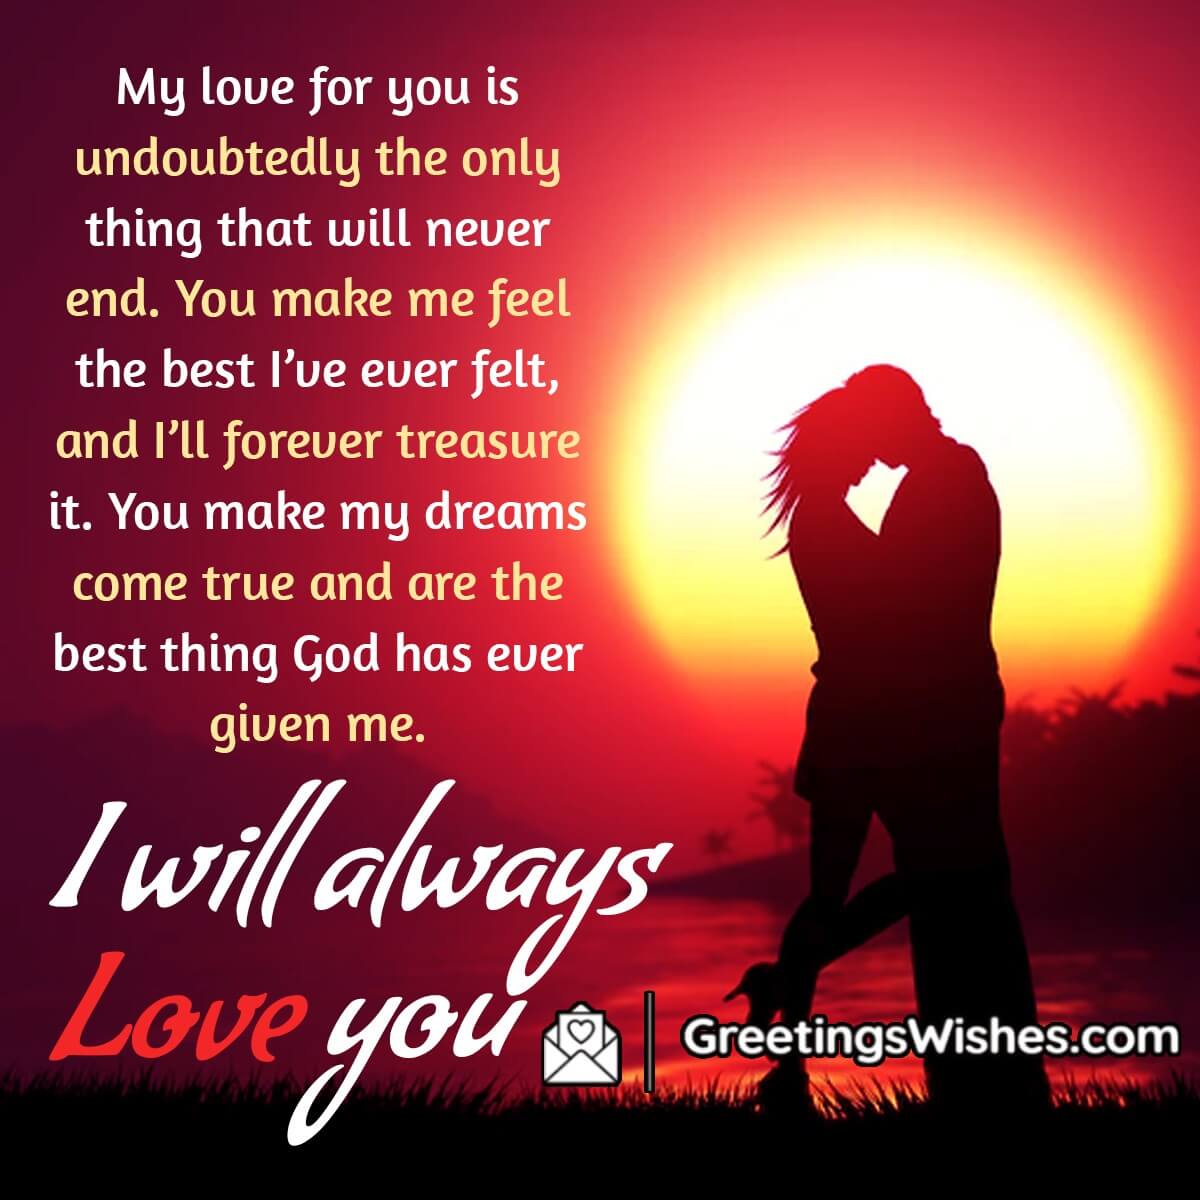 Love Messages For Your Sweetheart - Greetings Wishes